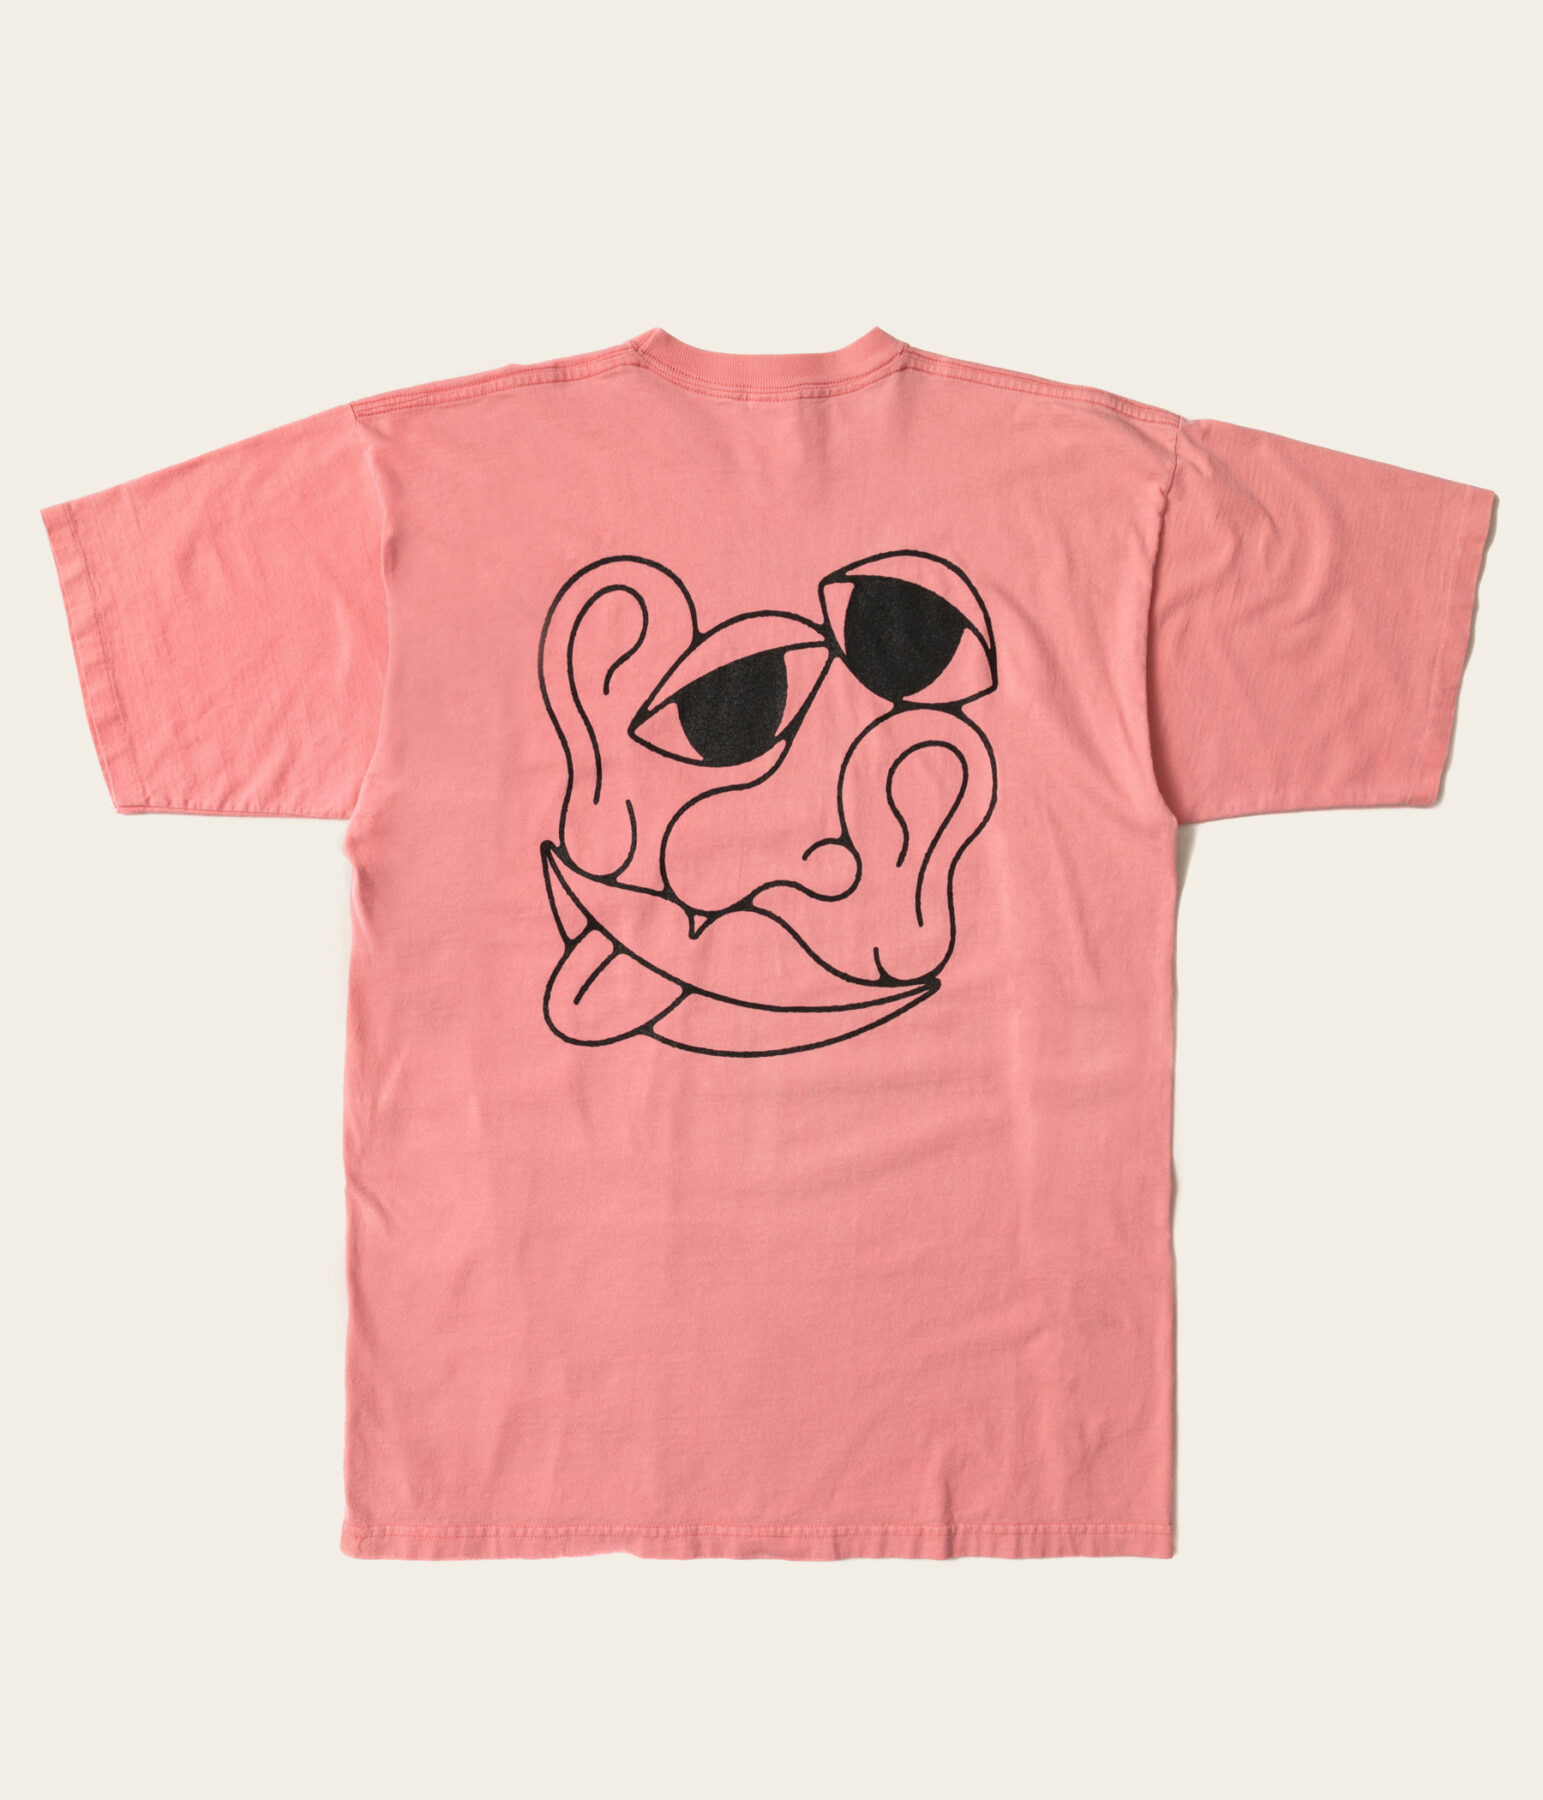 Pink graphic tee